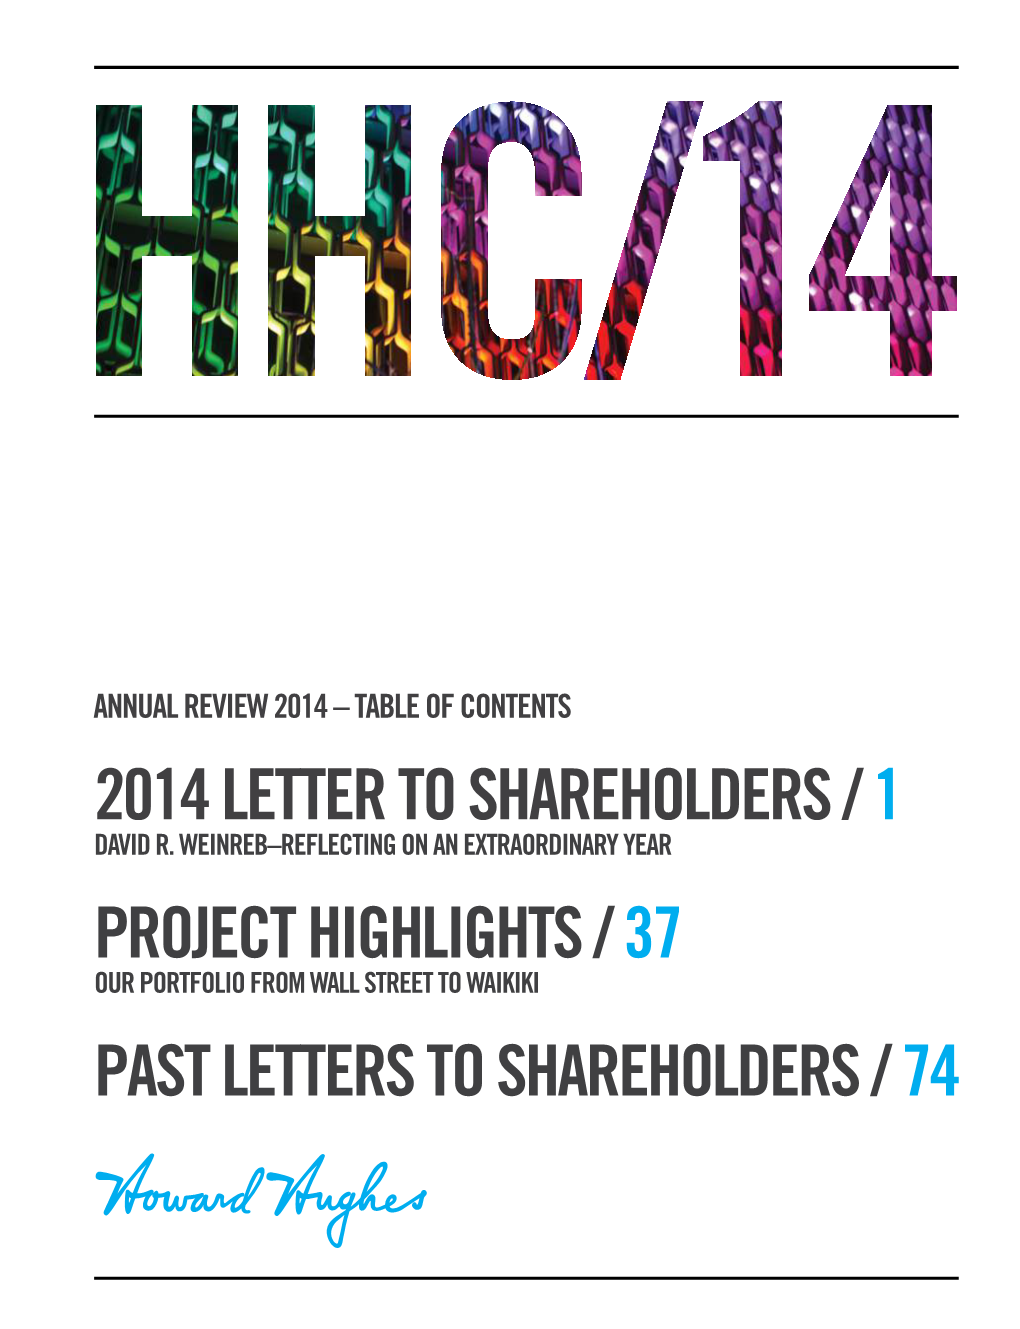 2014 Letter to Shareholders / 1 Project Highlights / 37 Past Letters to Shareholders / 74